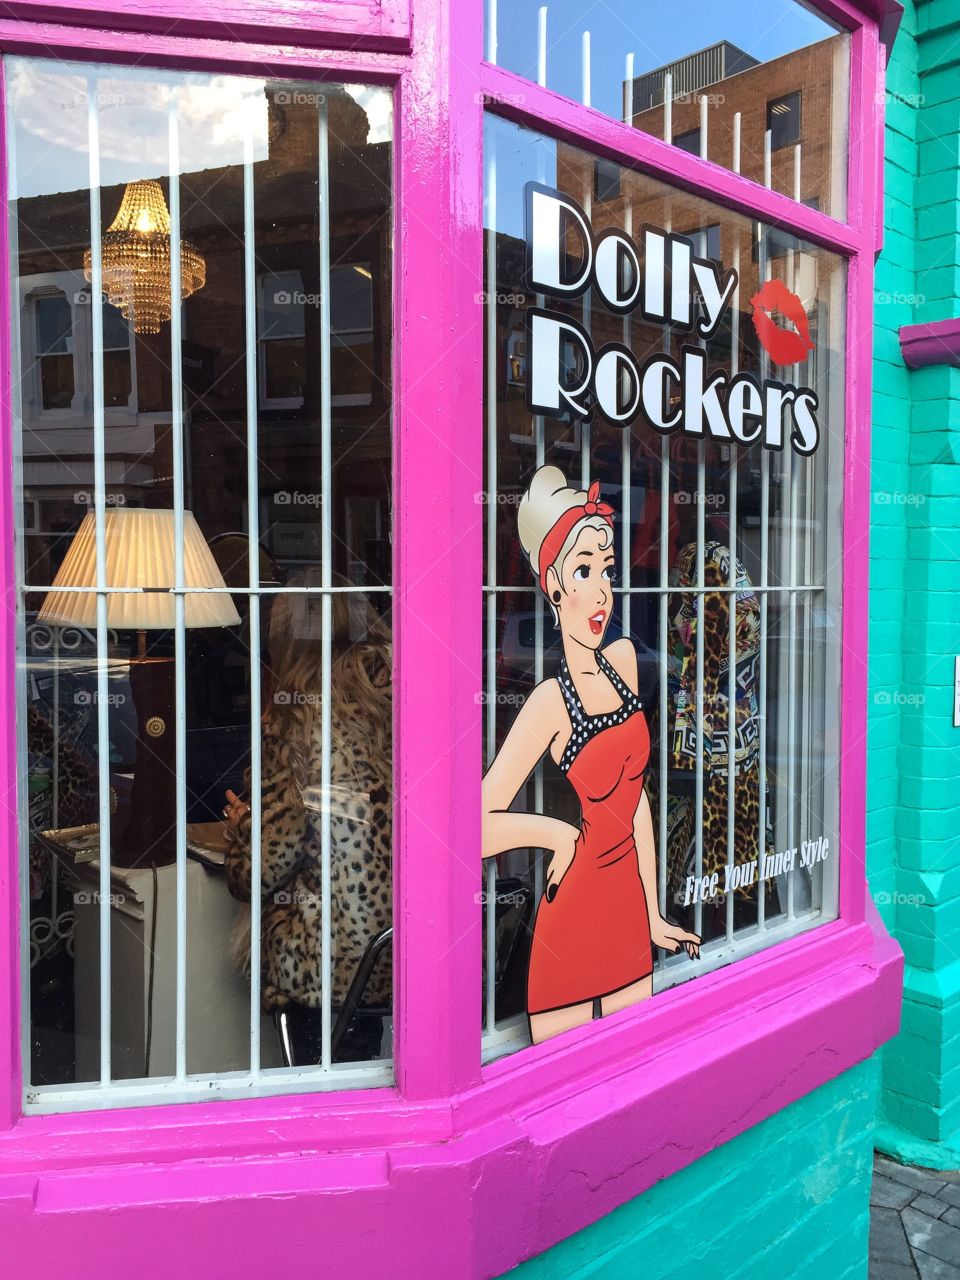 The brightly painted, cheerful window of a fashion clothing store in the UK. #windowsaroundtheworld